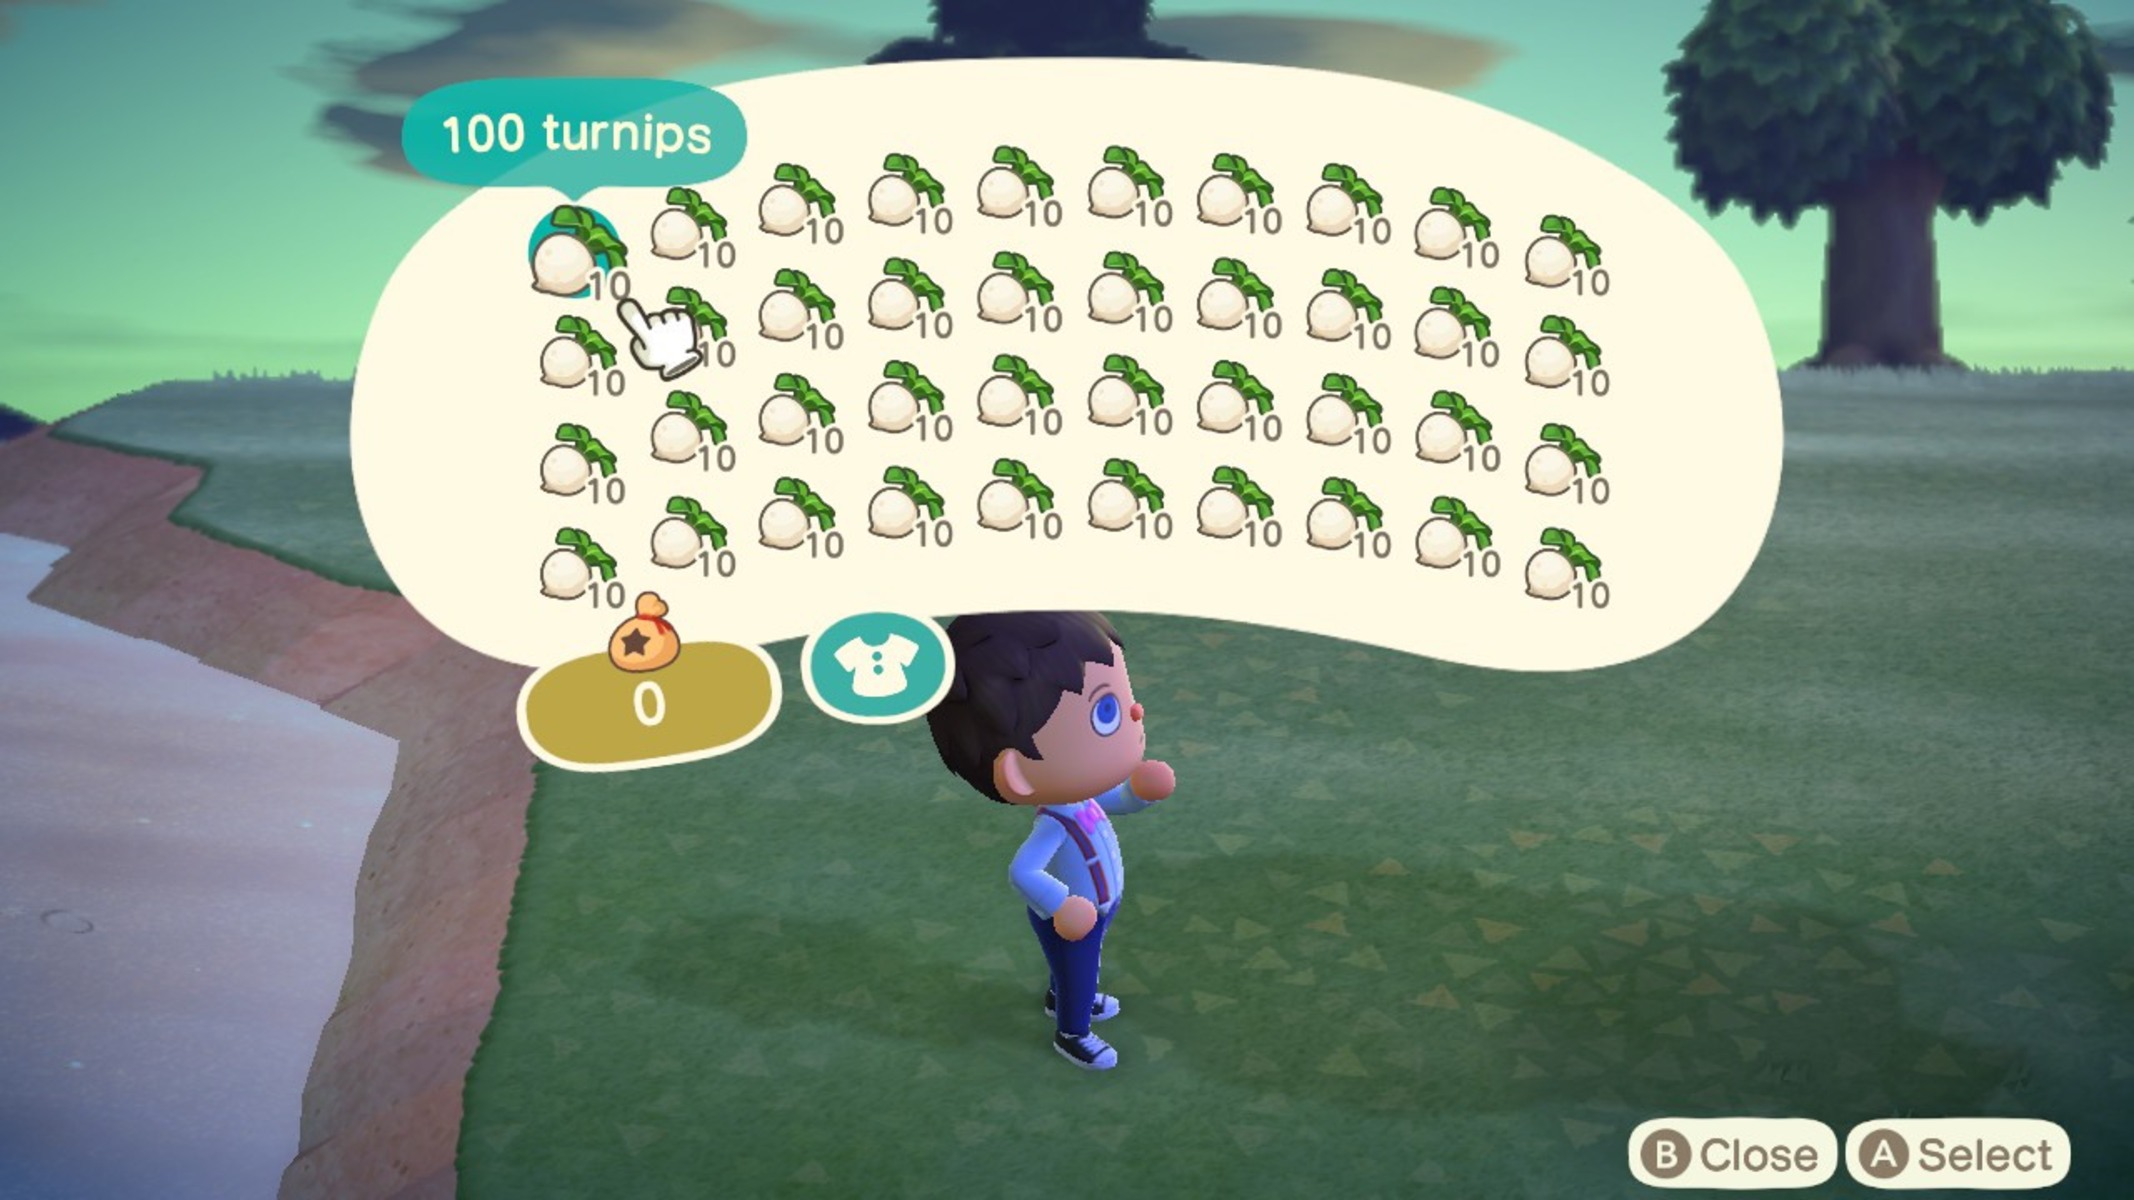 How To Get Turnips In Animal Crossing